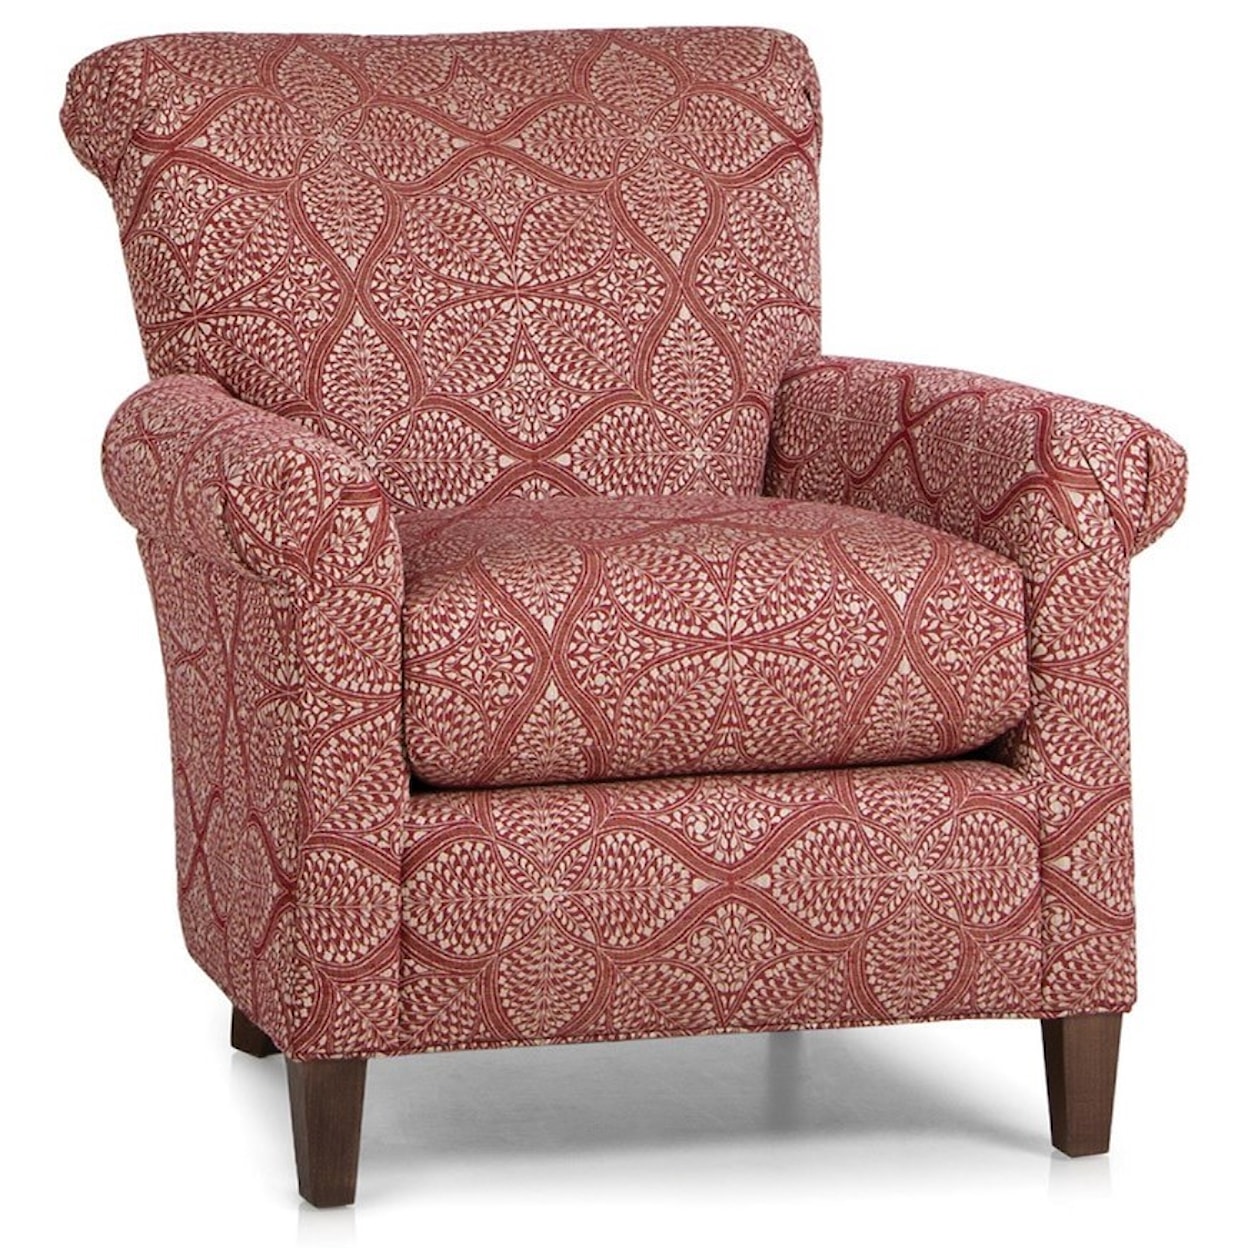 Smith Brothers 961 Upholstered Chair